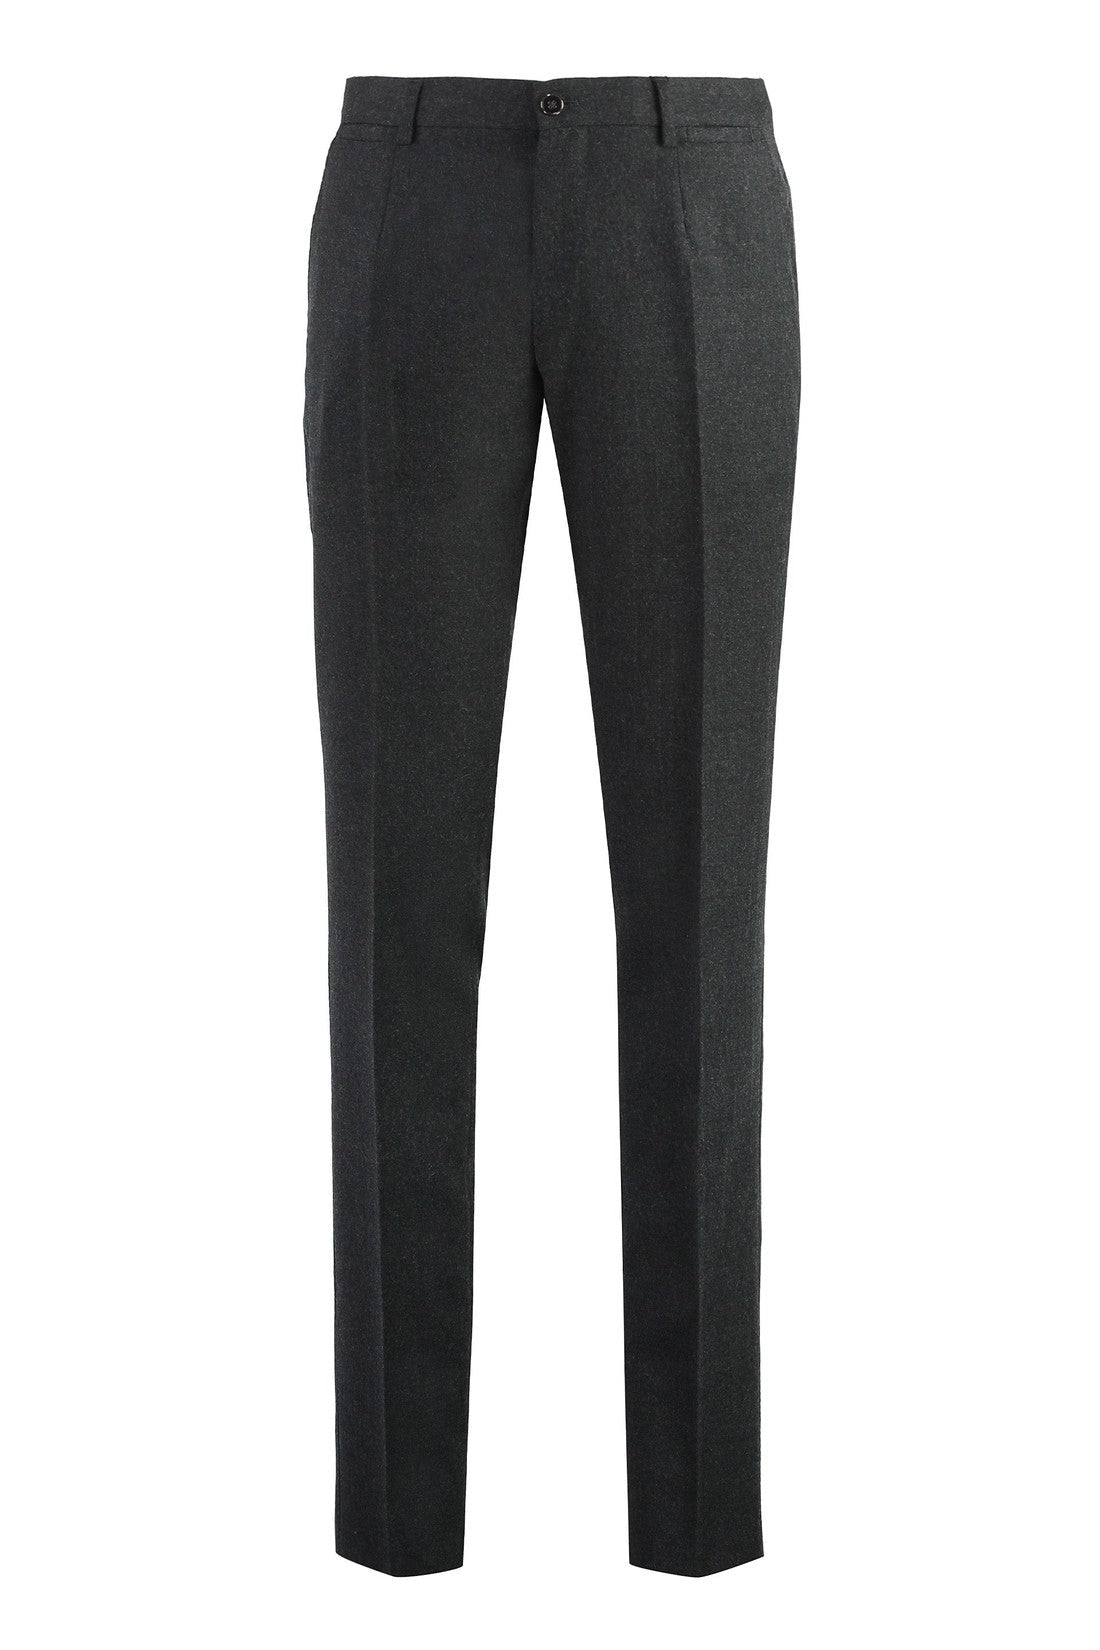 Dolce & Gabbana-OUTLET-SALE-Stretch wool trousers-ARCHIVIST